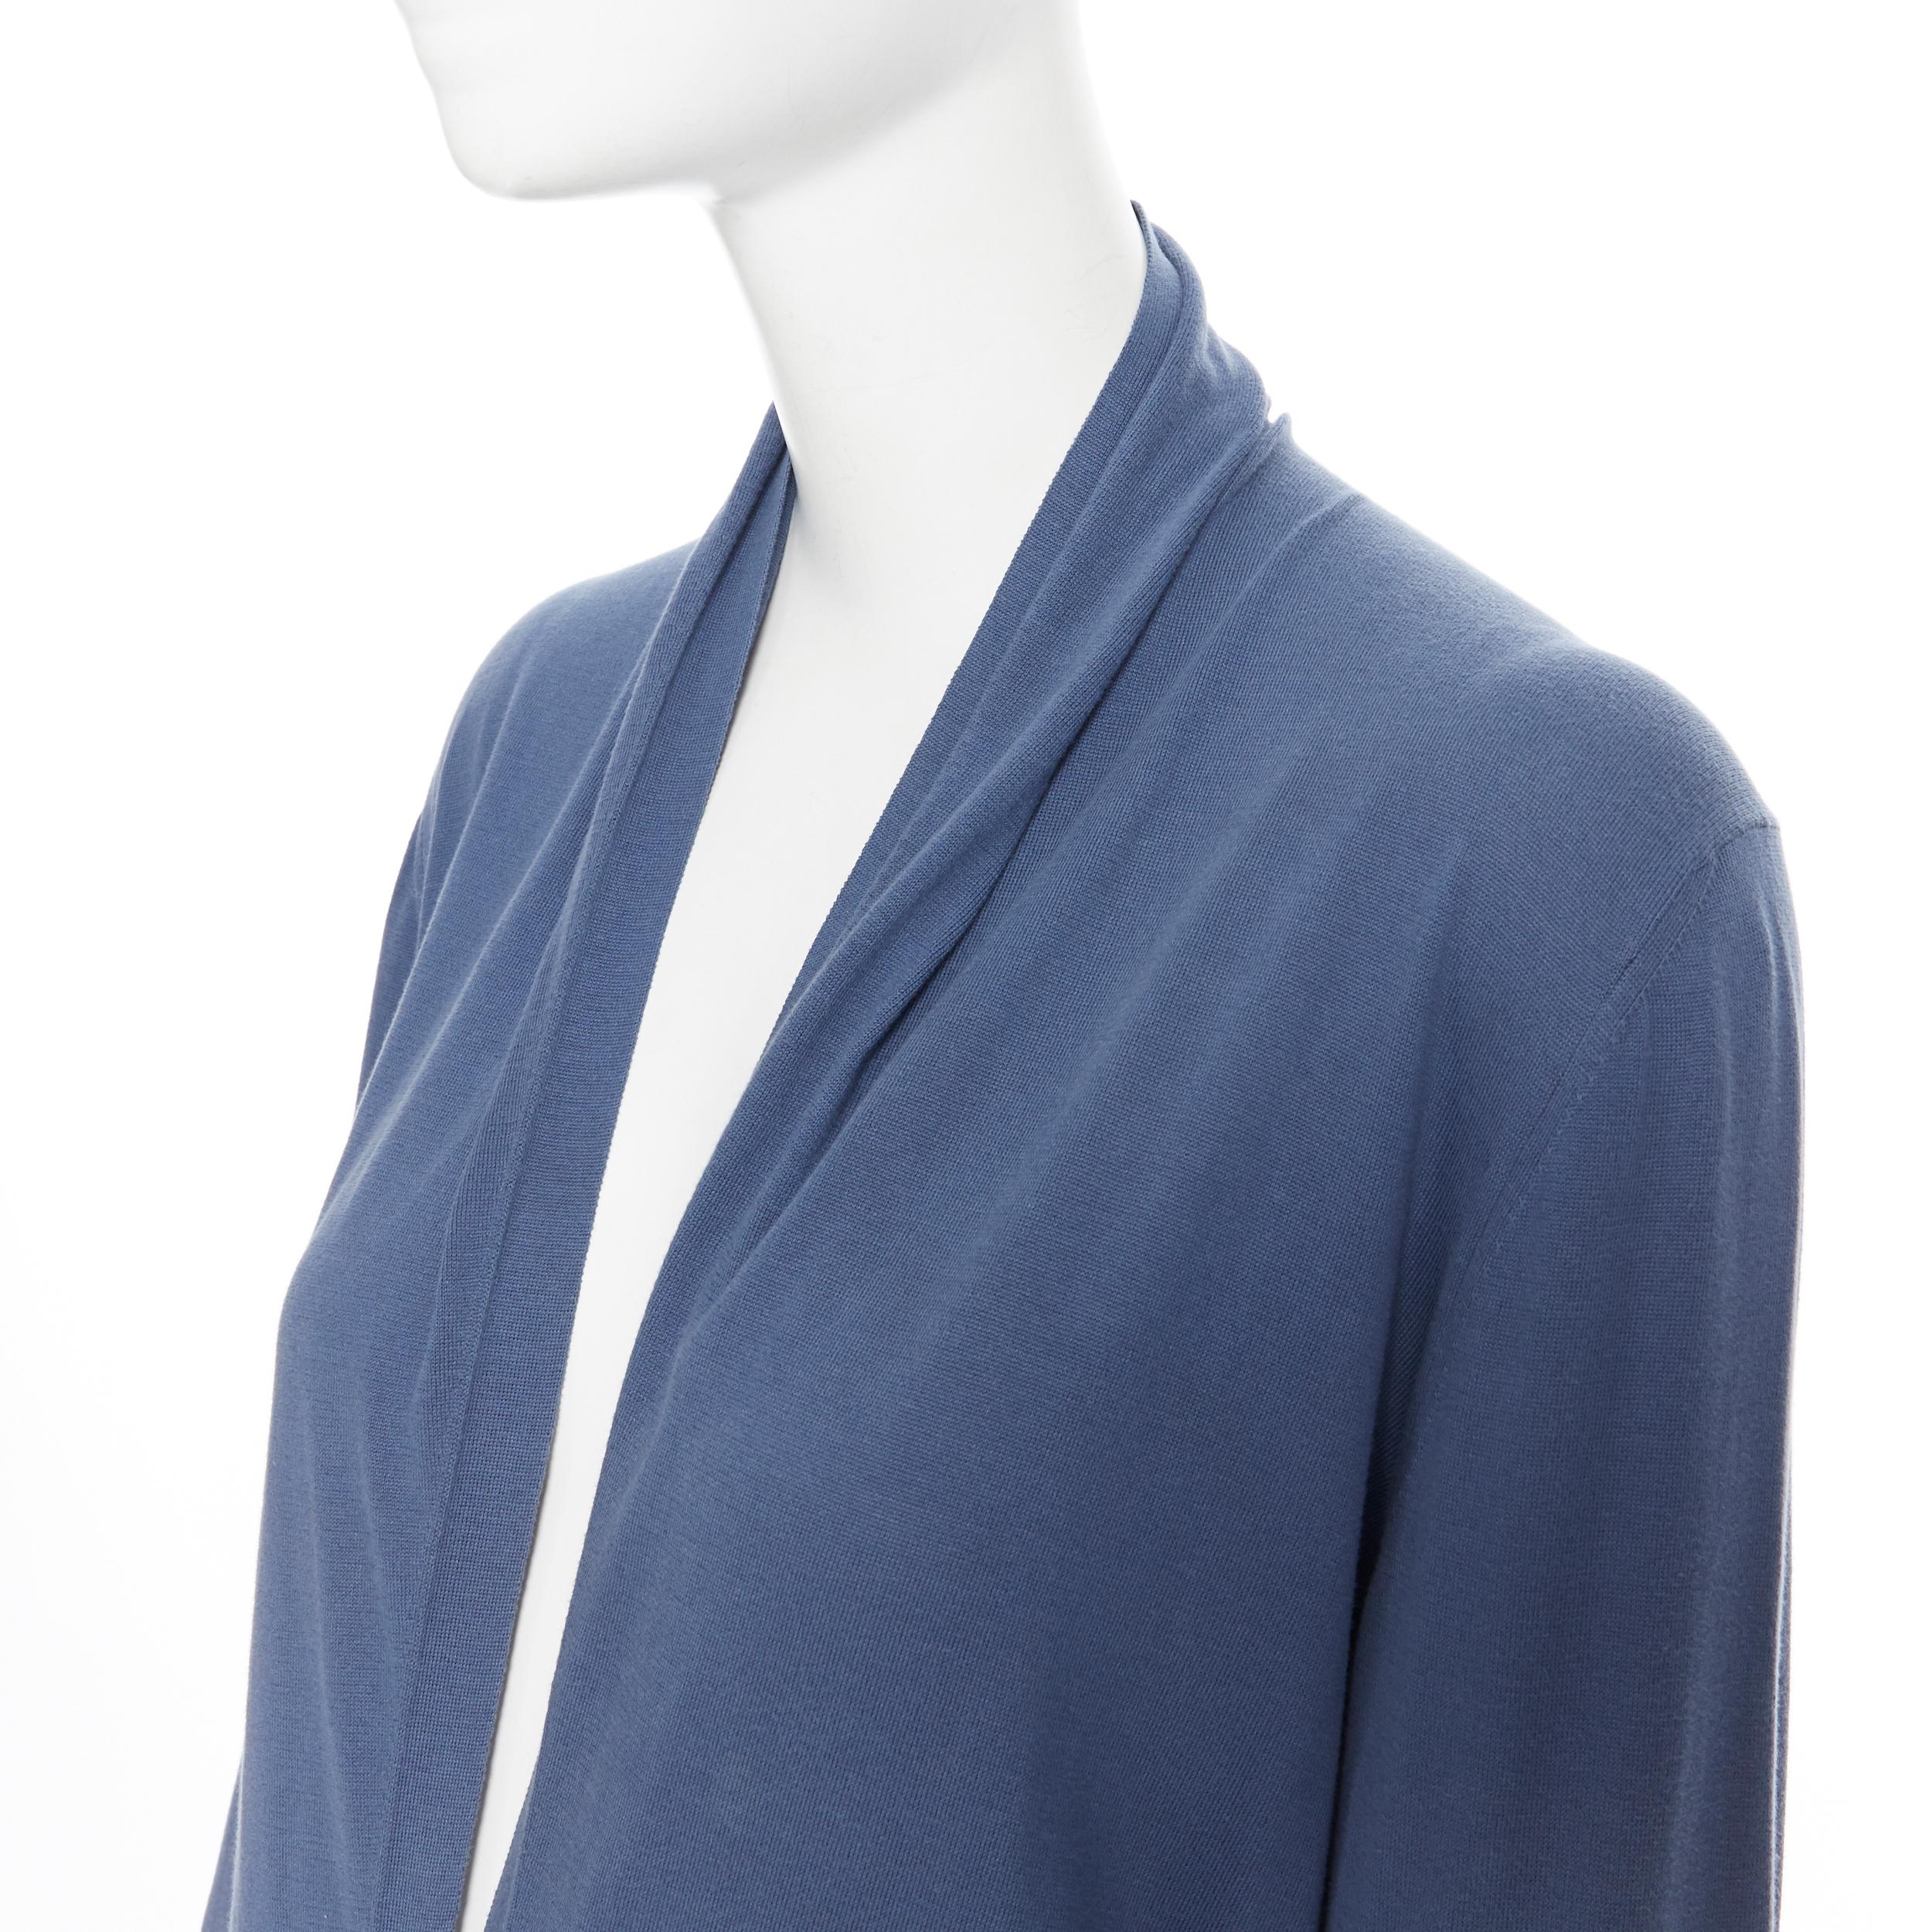 Women's HERMES 100% cotton blue H mother of pearl button dual pocket cardigan sweater XS